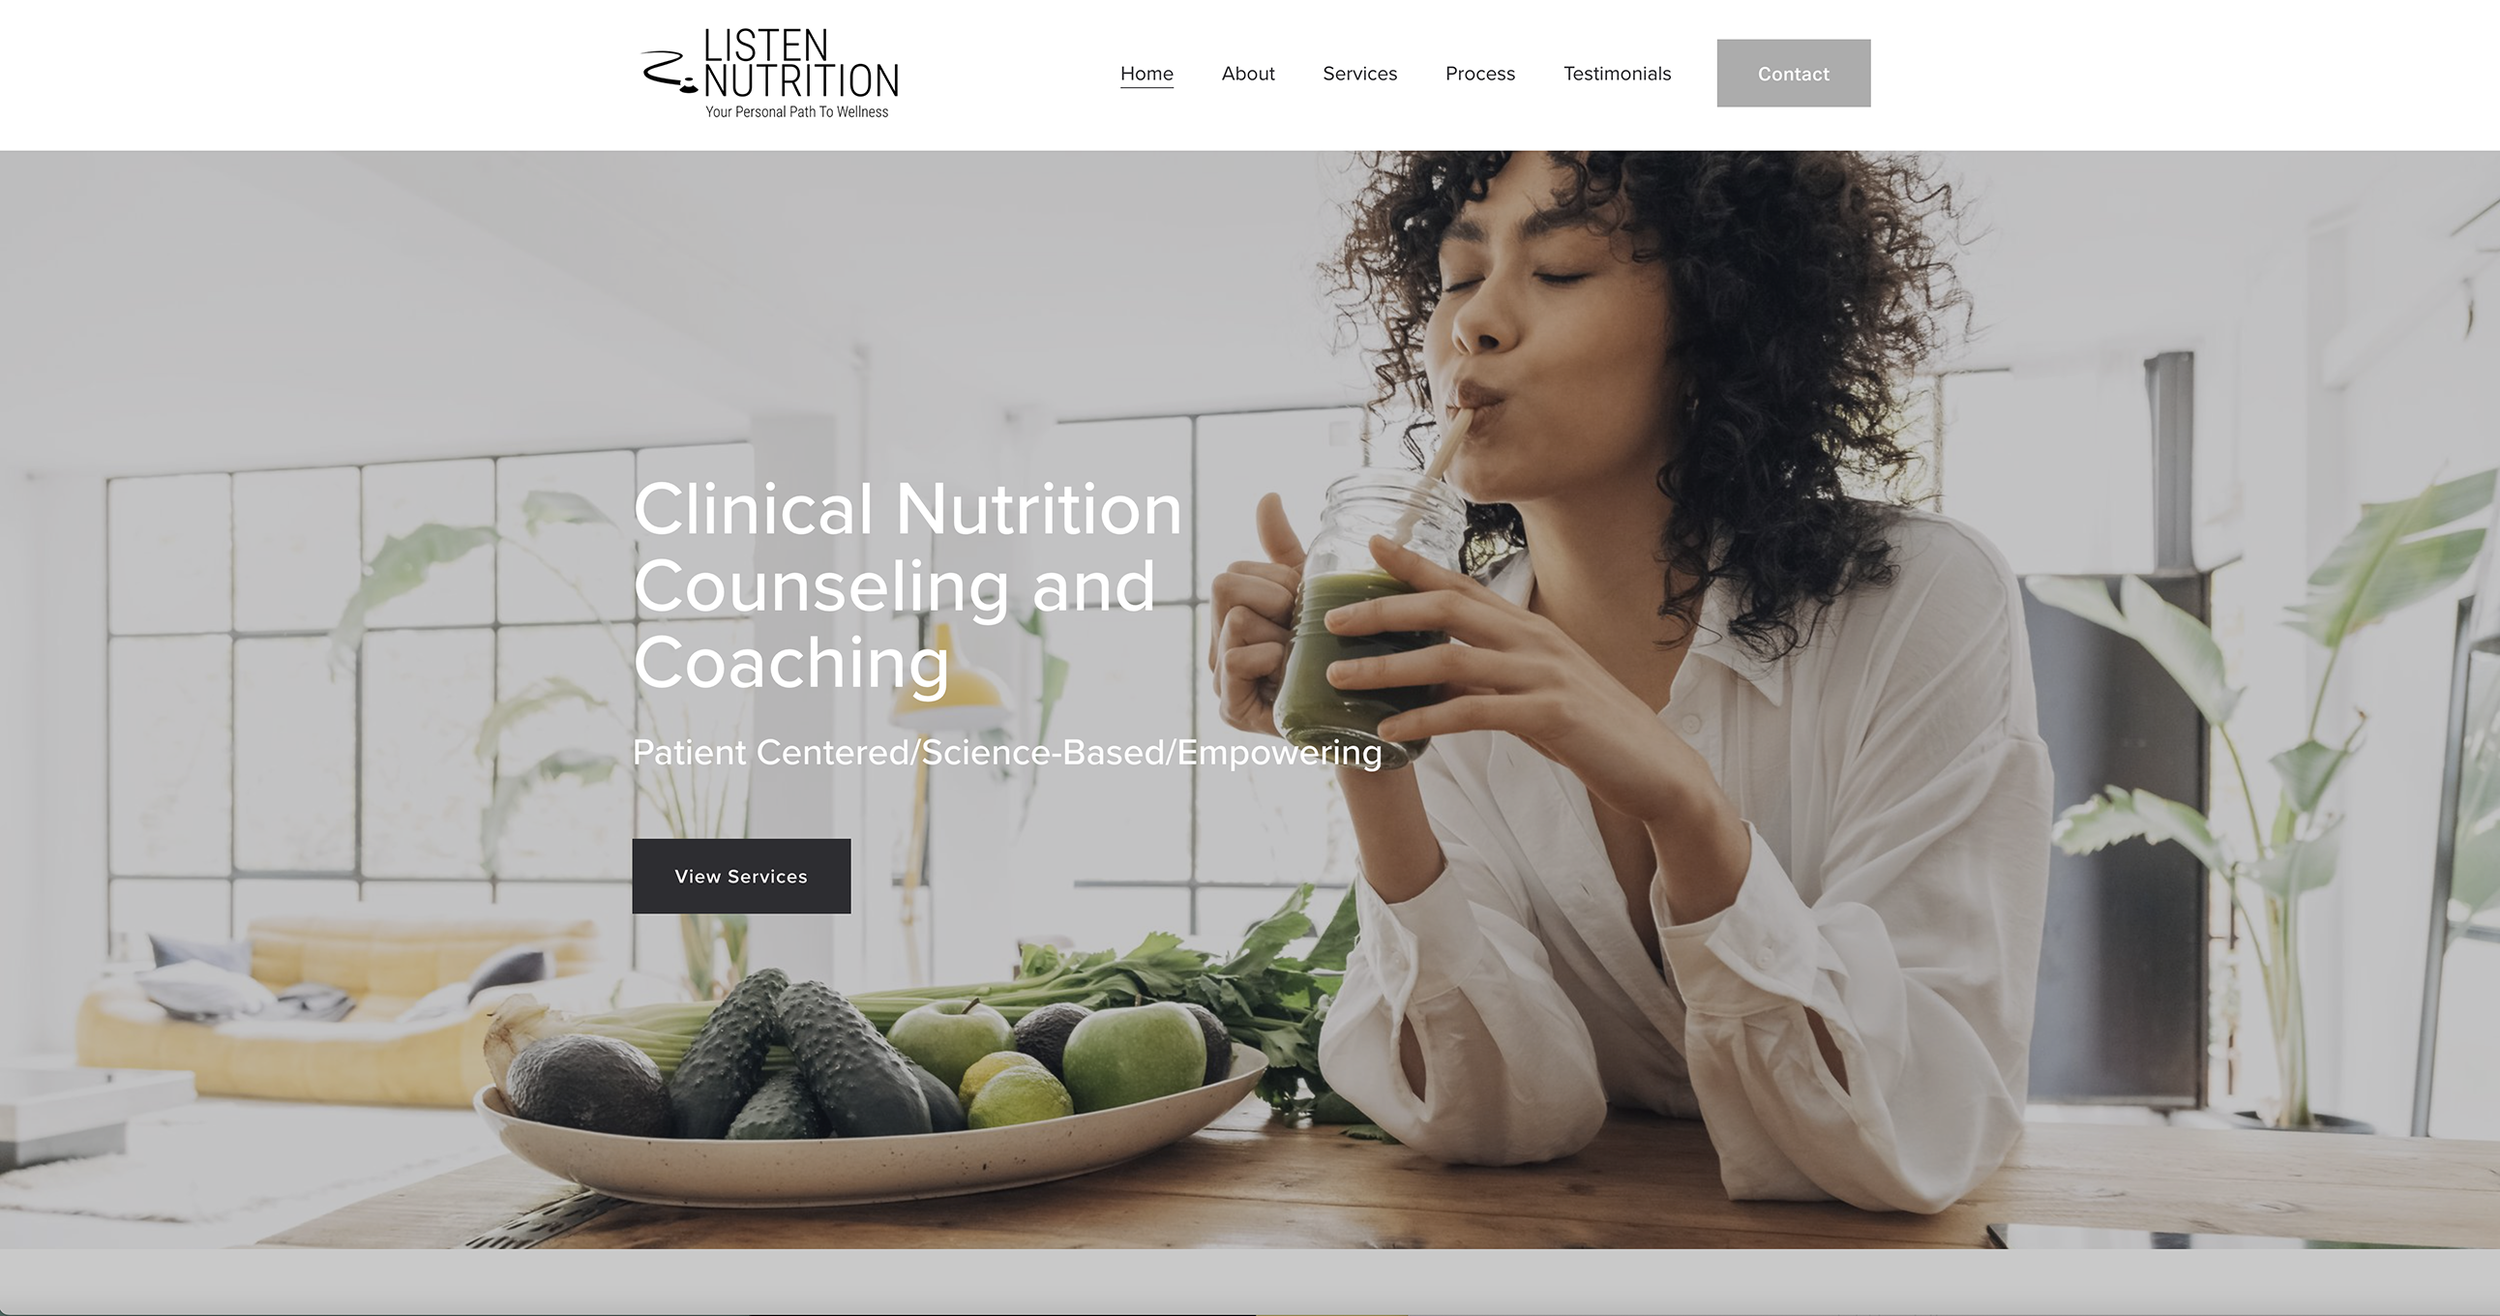 Listen Nutrition homepage.png